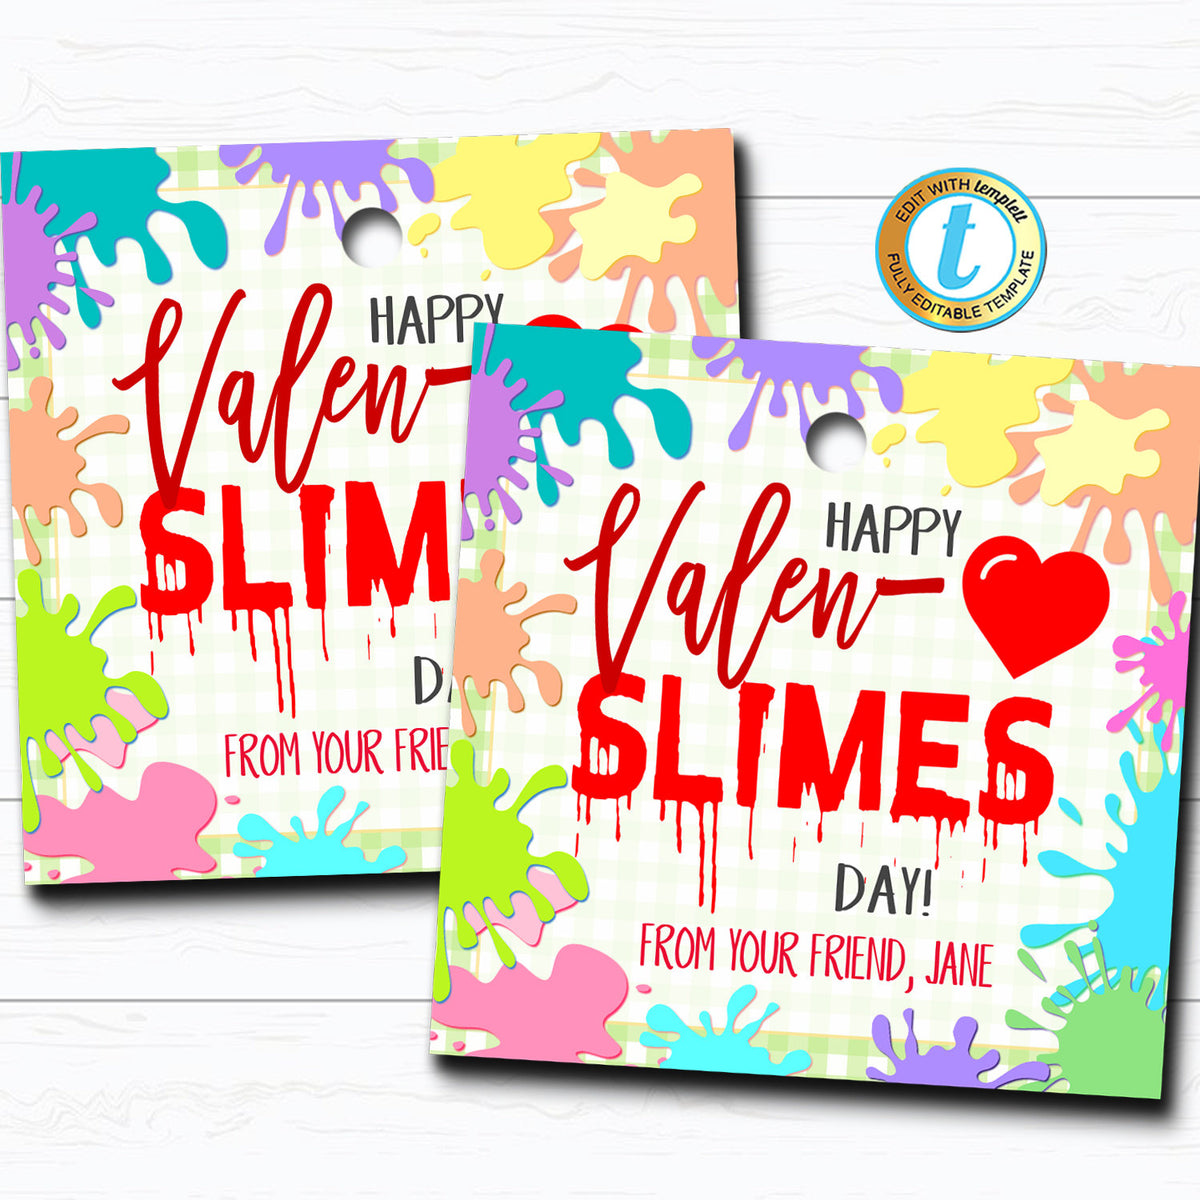 Valentine Slime Gift Tags Happy Valen Slimes Day Printable TidyLady